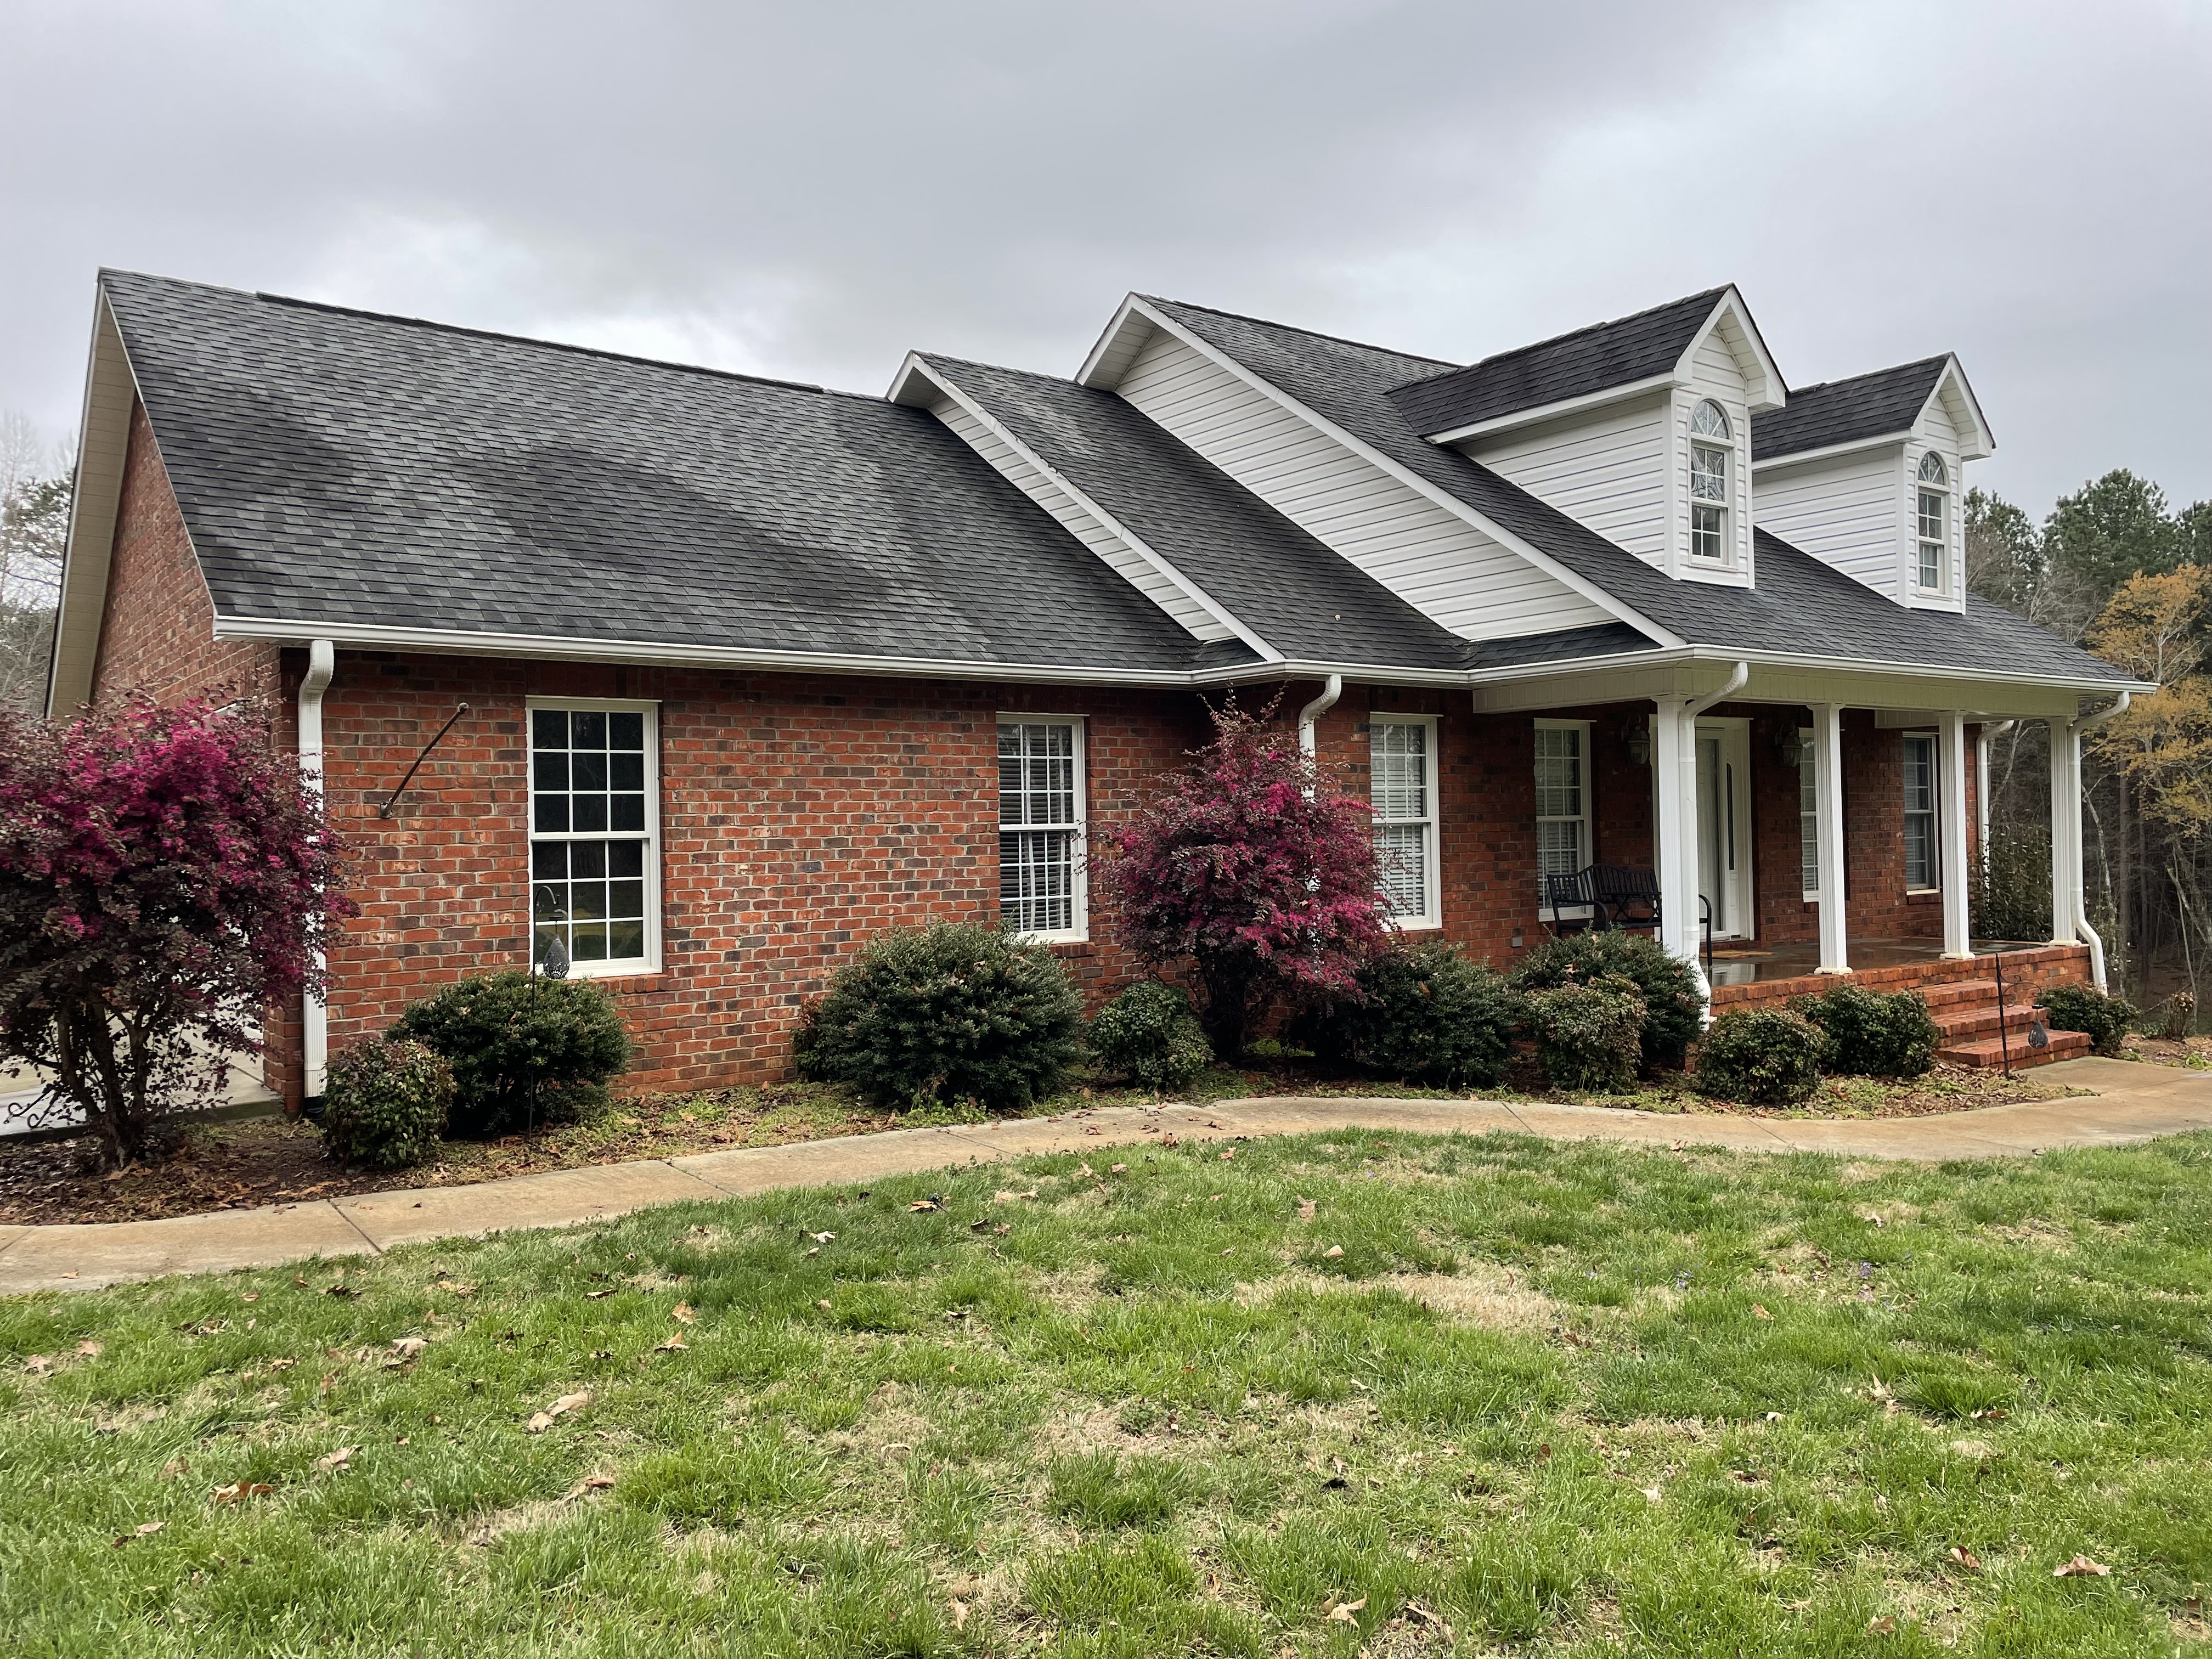 We washed a beautiful brick home in Dobson, NC